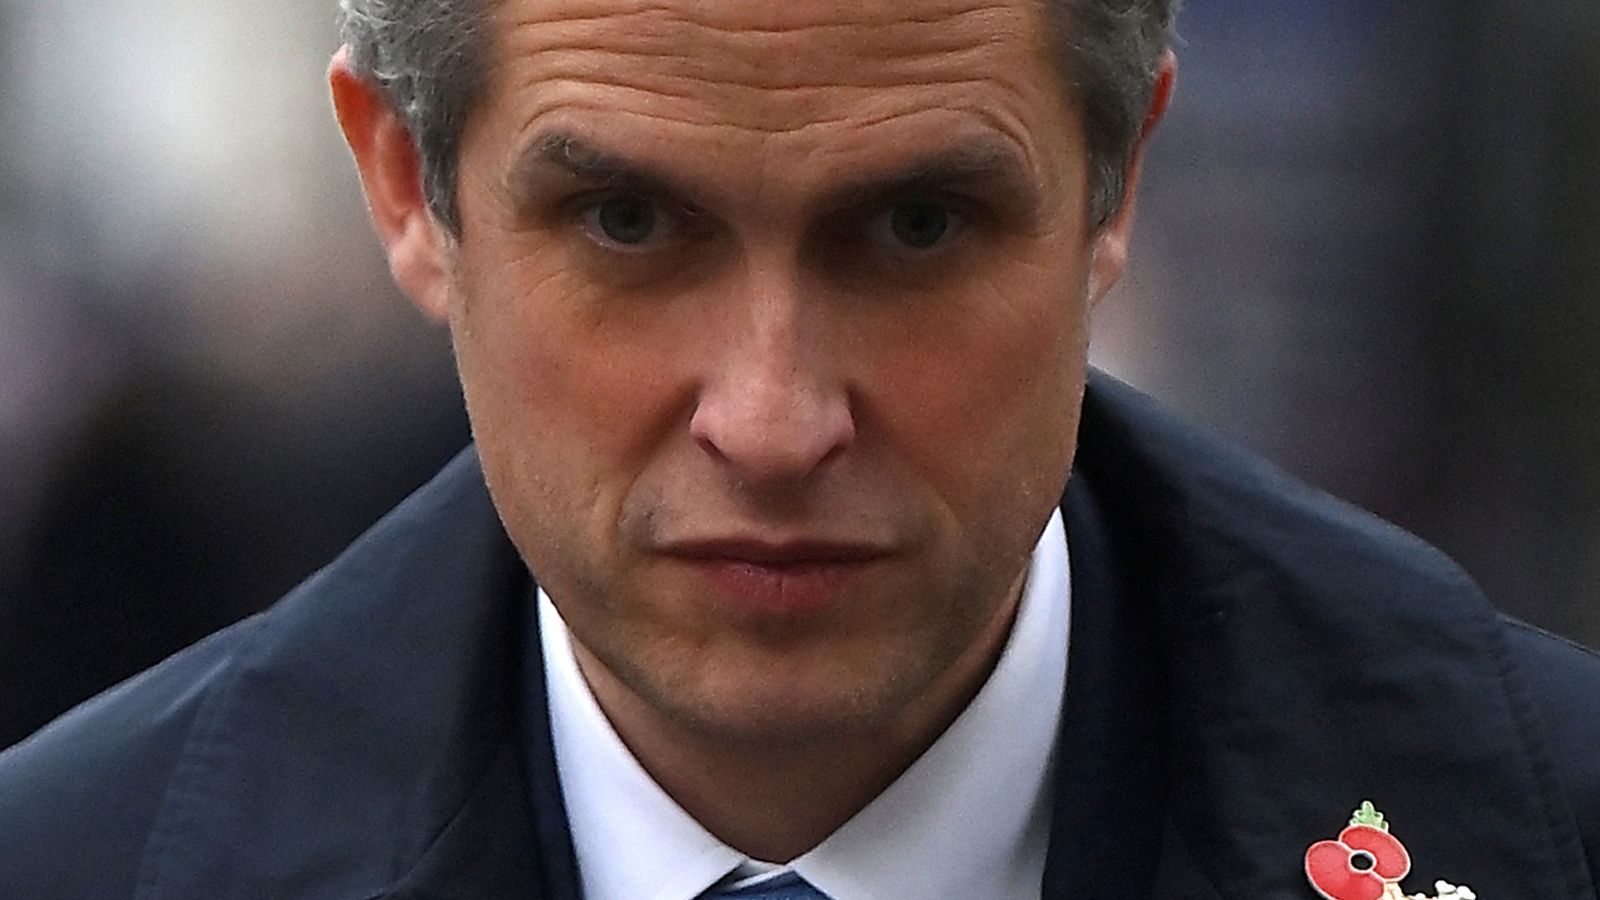 Gavin Williamson's departure is about more than just the messages | Sam Coates